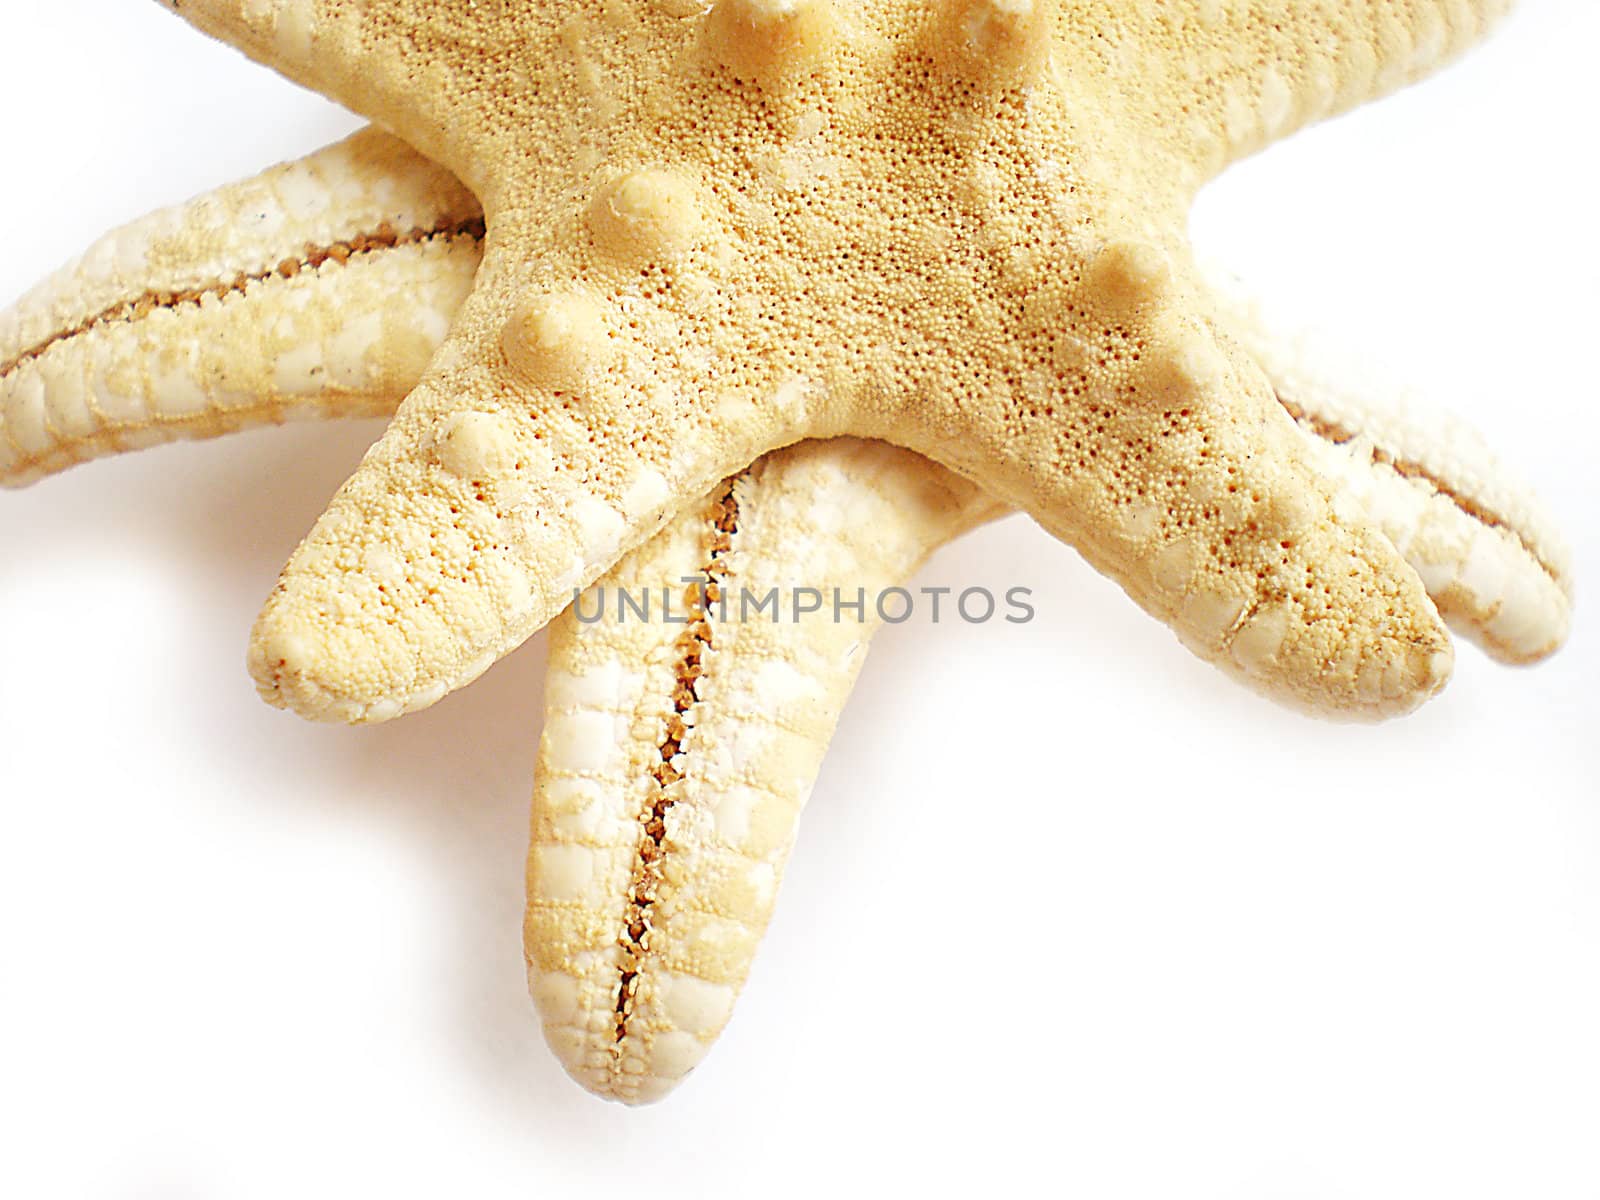 star fish isolated on white background